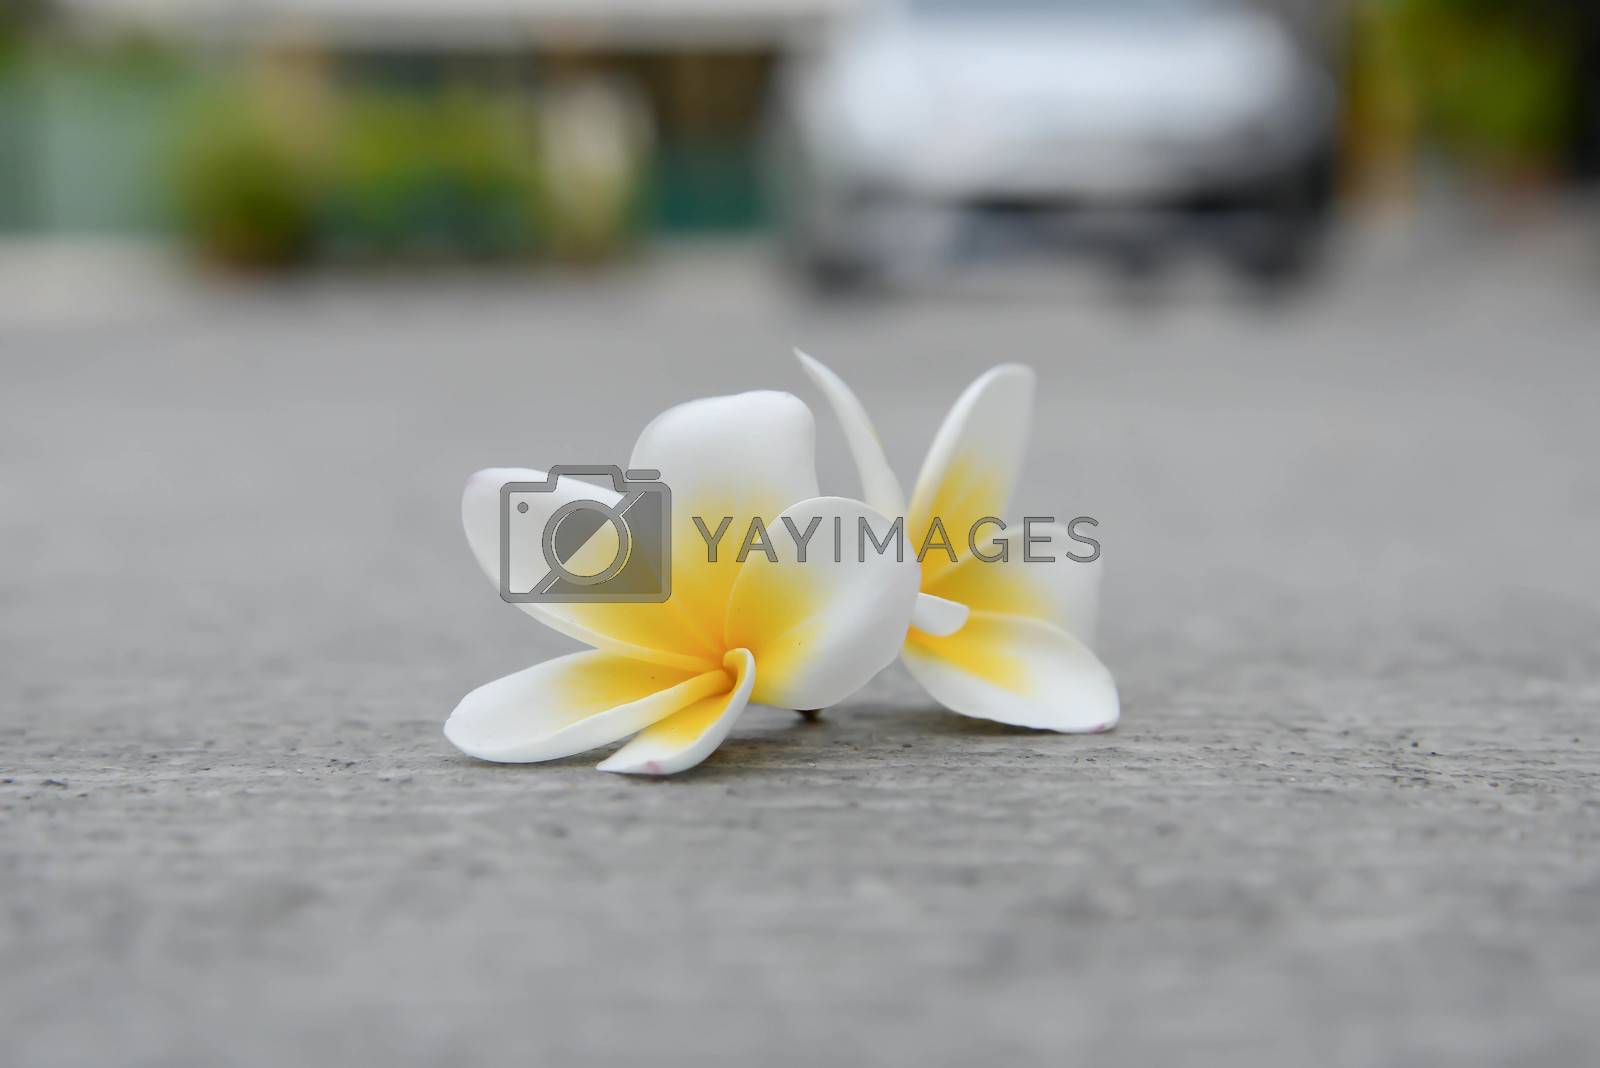 Royalty free image of Plumeria flowers by Magneticmcc